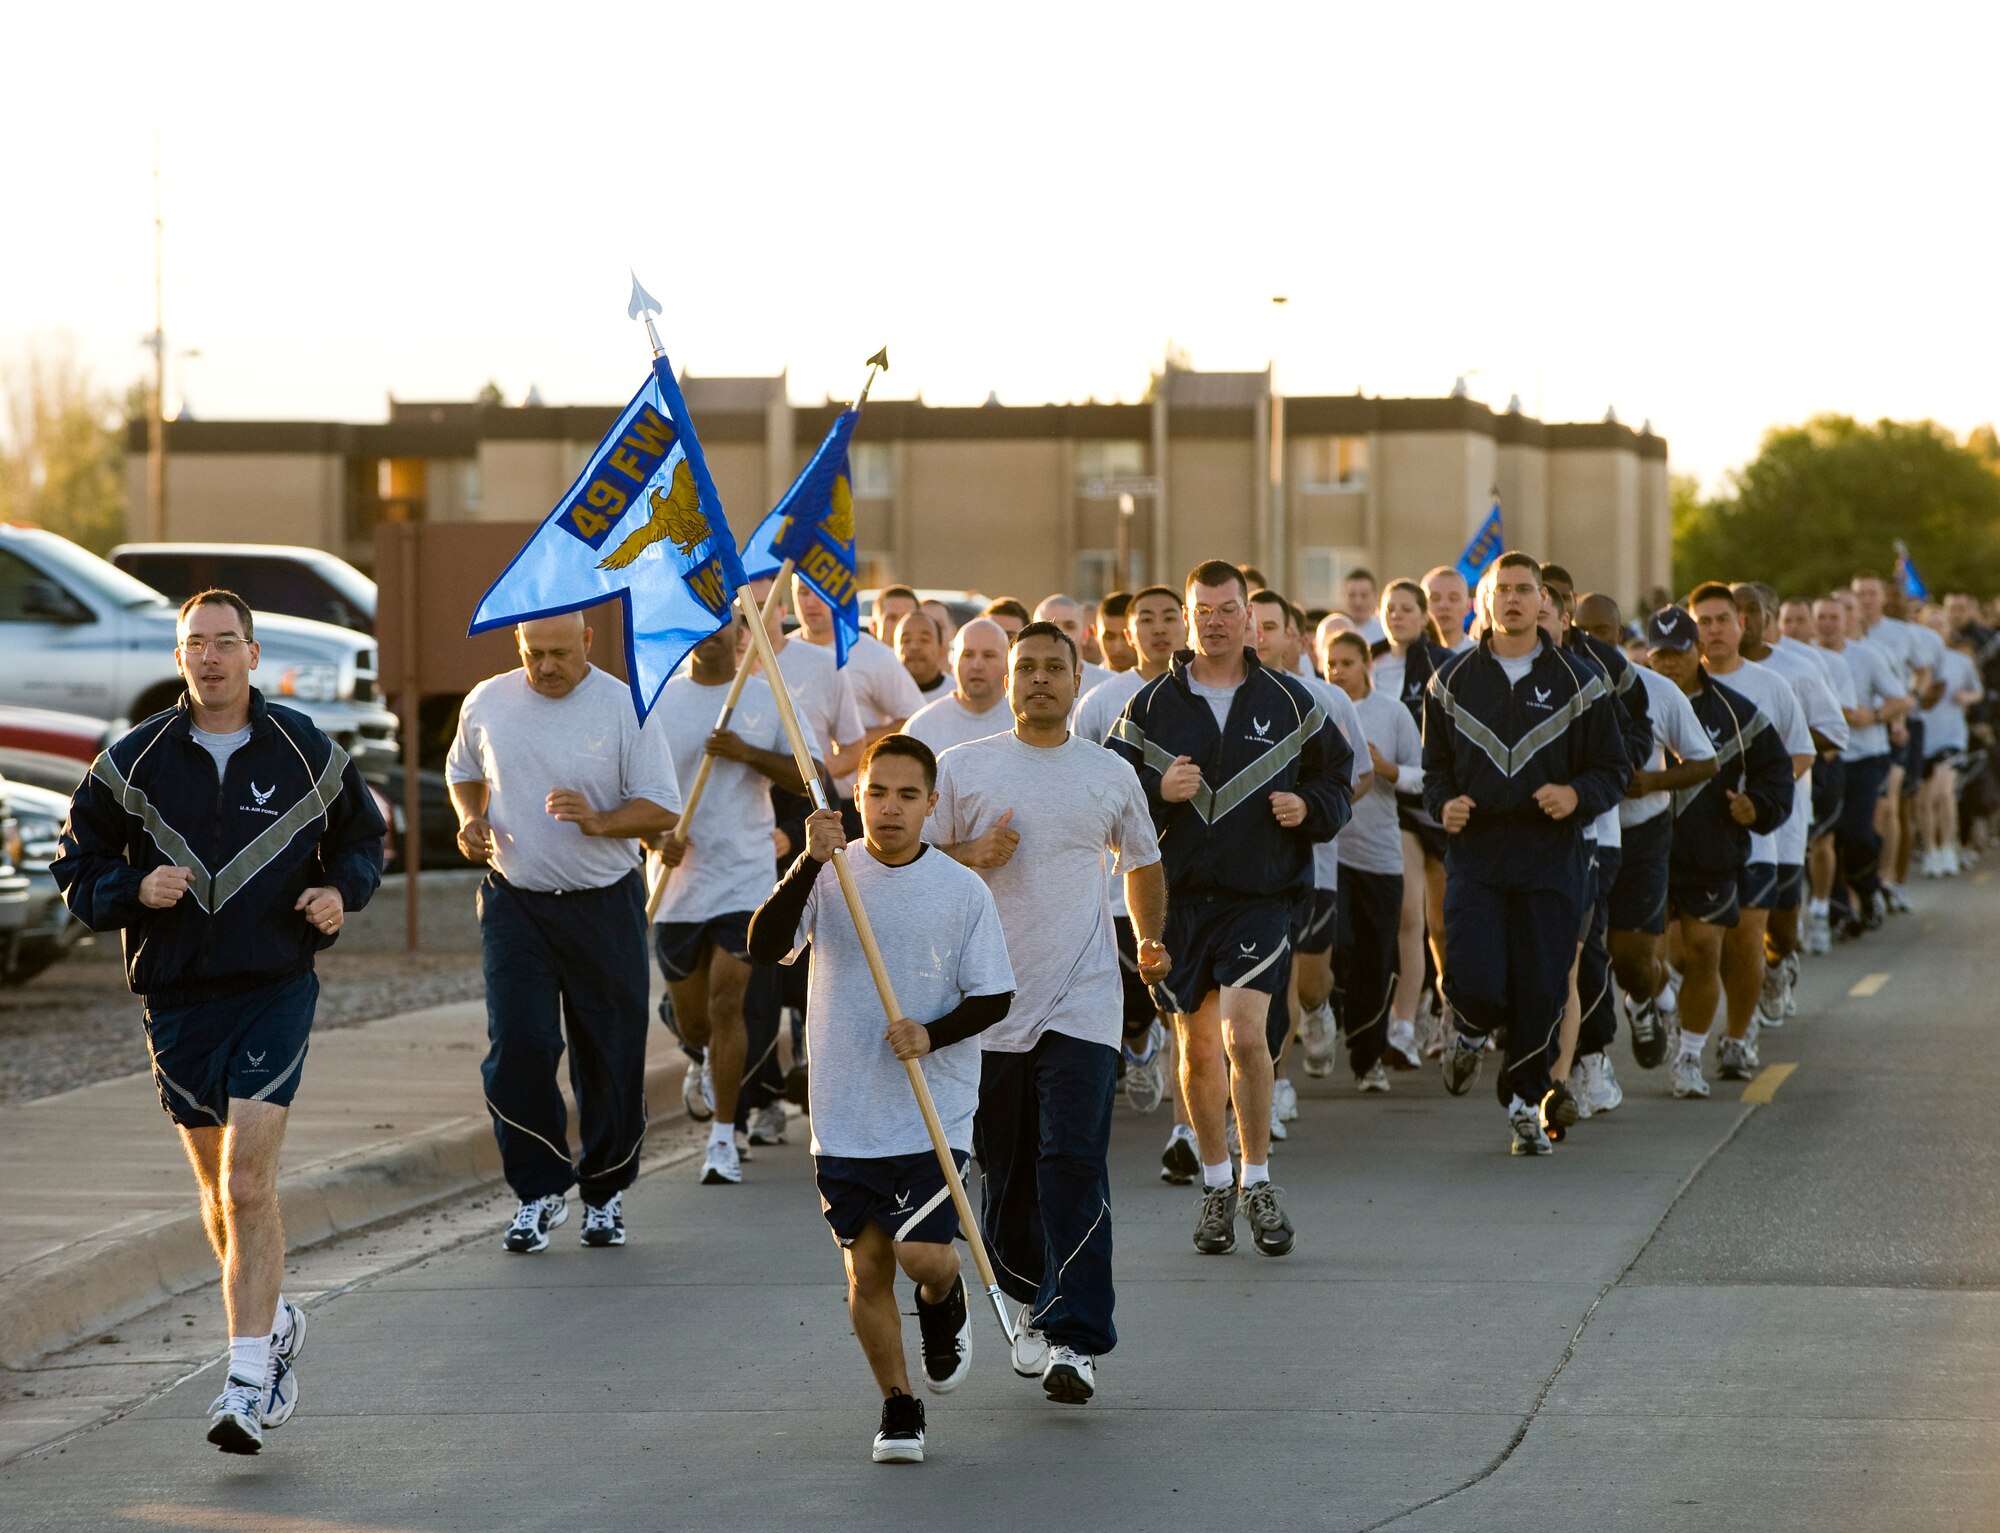 Members of the 49th Mission Support Group run in formation during the 49th Fighter Wing run at Holloman Air Force Base, N.M., October 10. The event kicked off the annual Holloman Sports Day. (U.S Air Force photo/Tech Sgt. Alan Port)